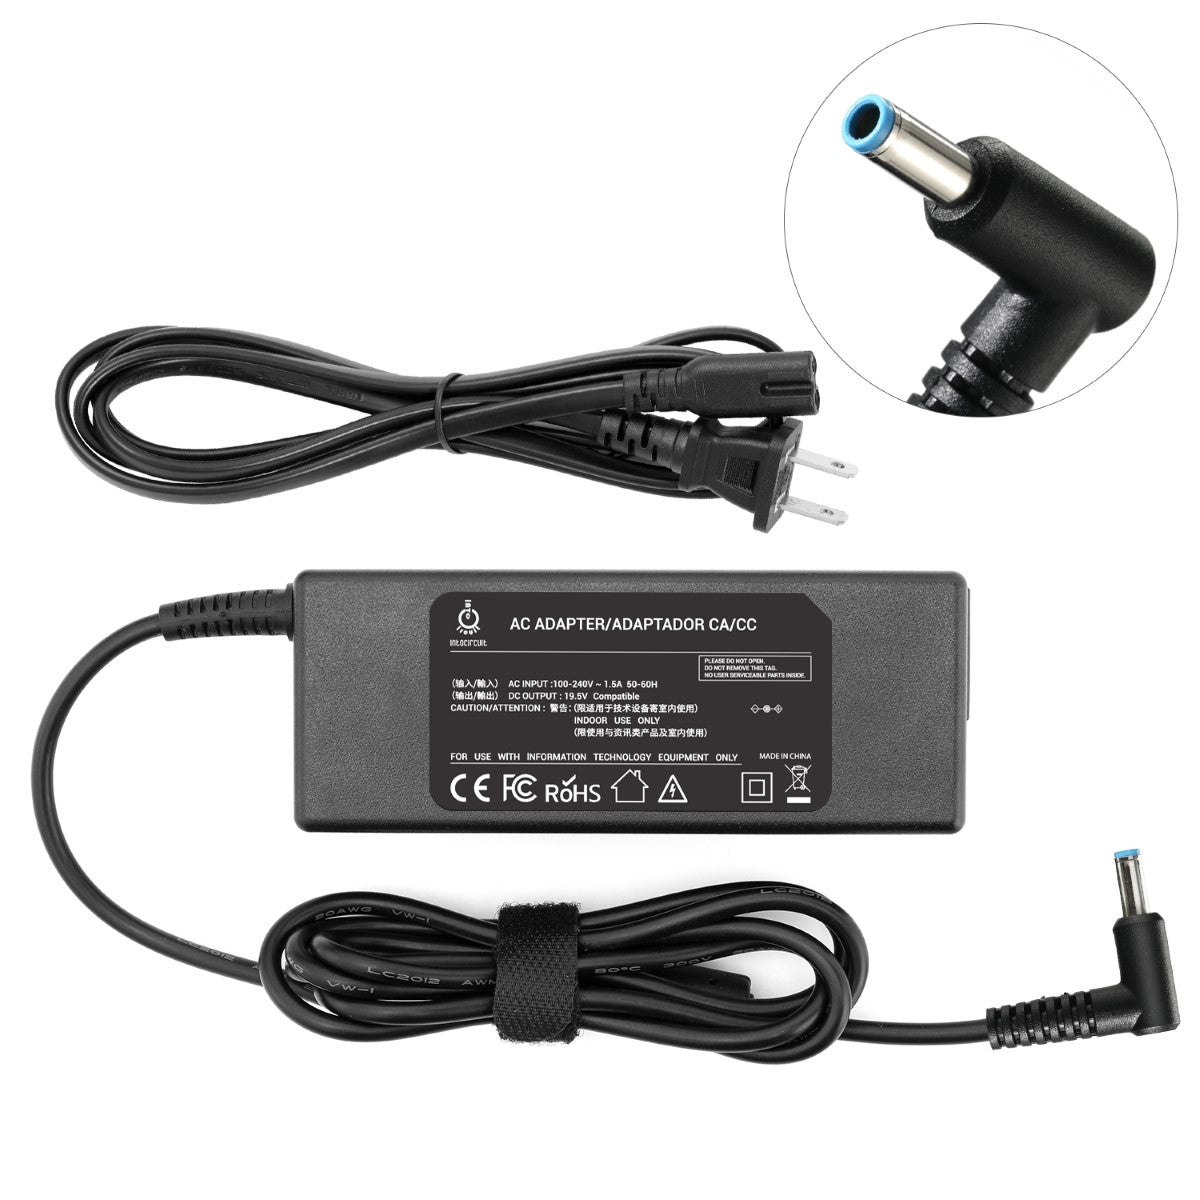 Charger for HP Elitebook 840 G3 Laptop